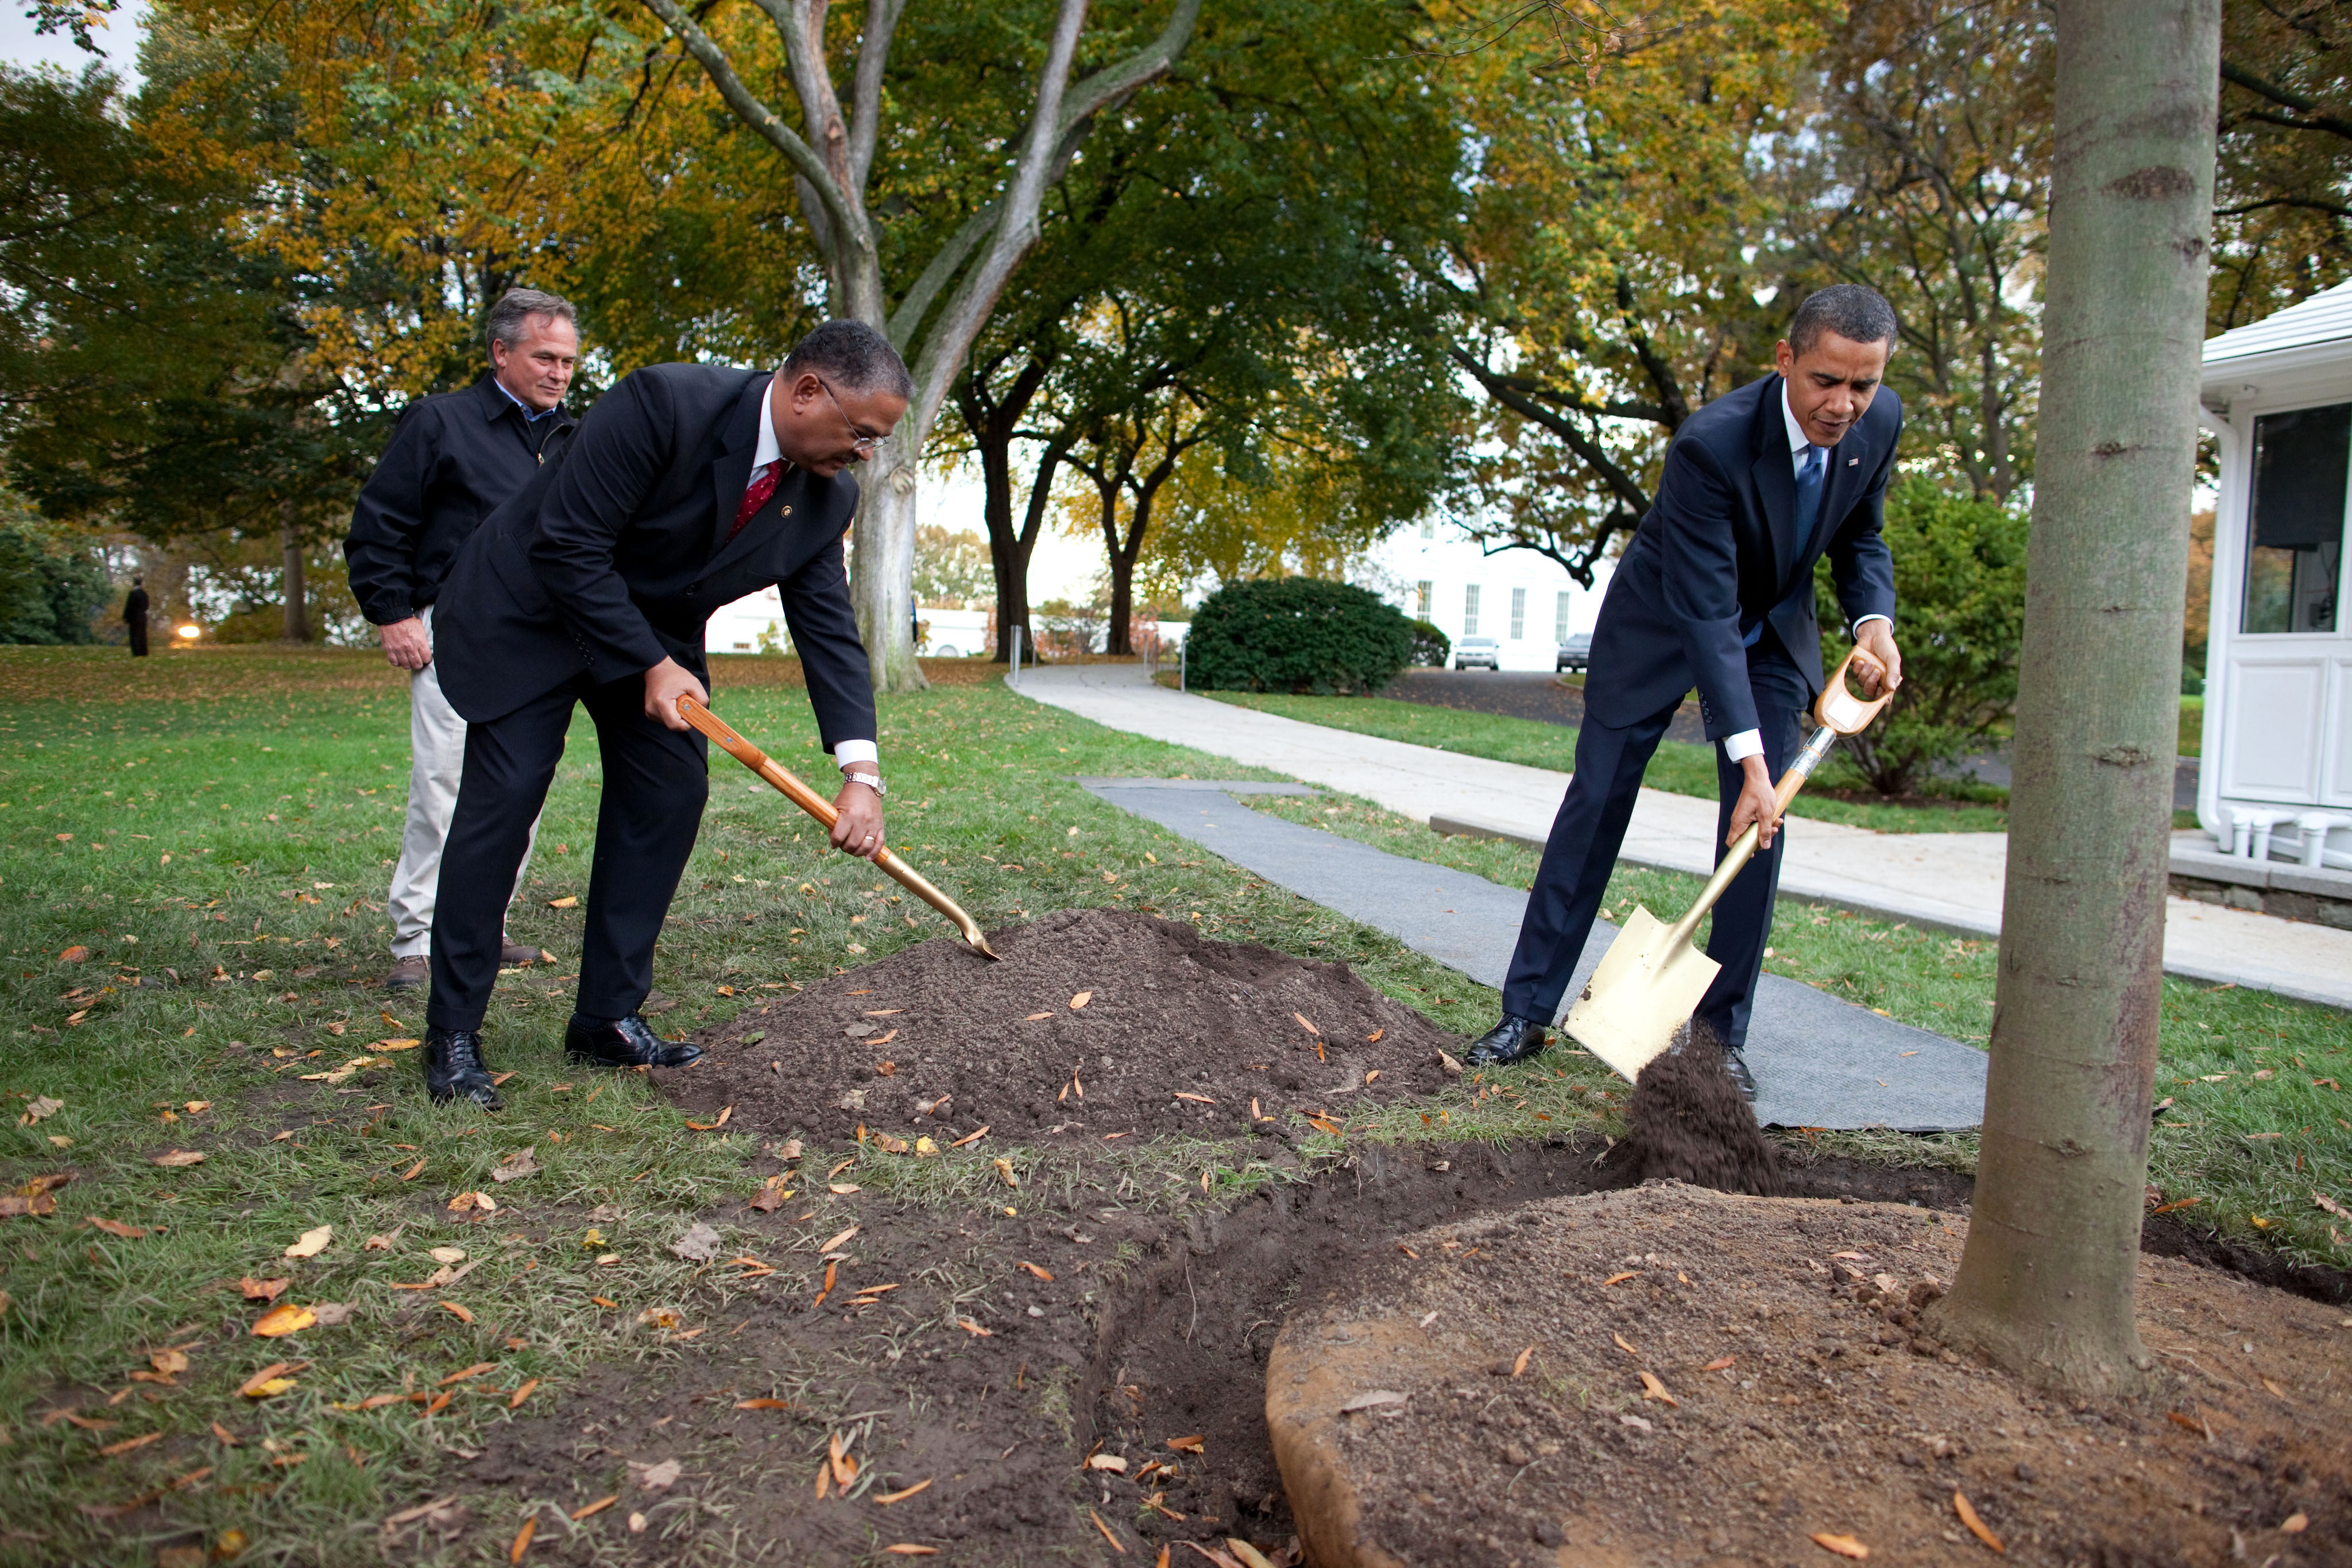 Barack Obama and the White House Chief Usher Stephen W. Rochon plant a commemorative tree